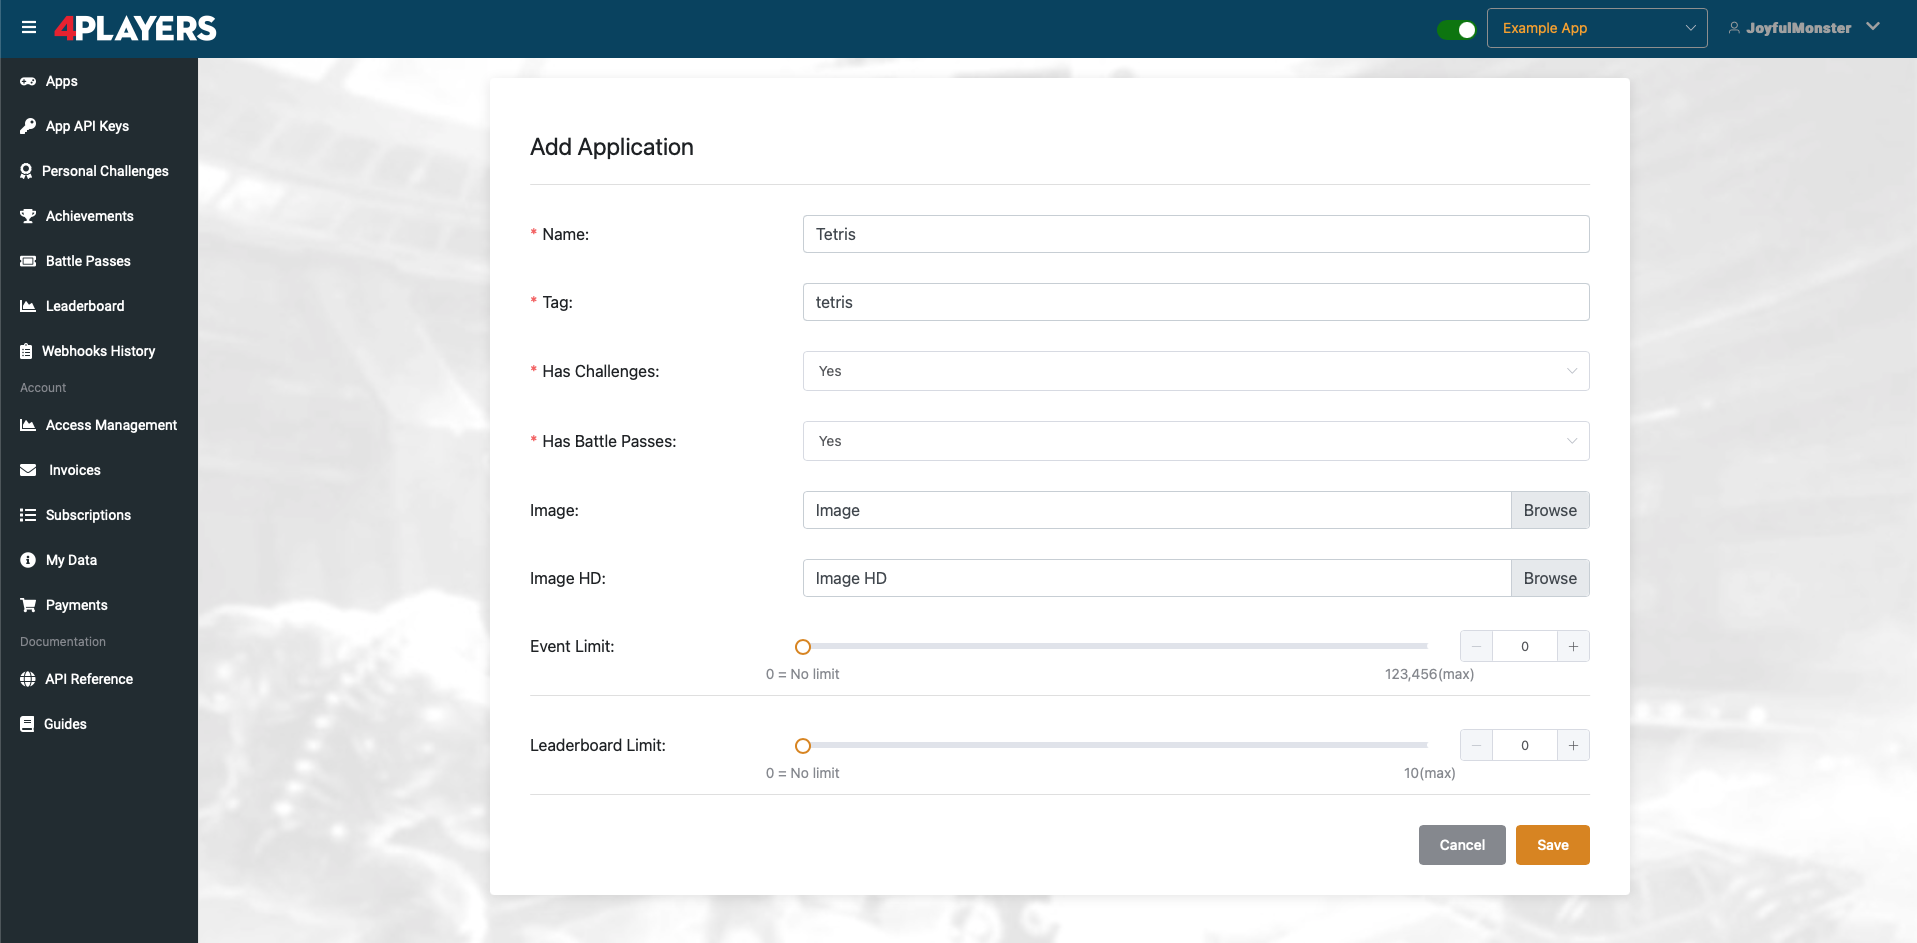 Adding an application in the Admin Panel